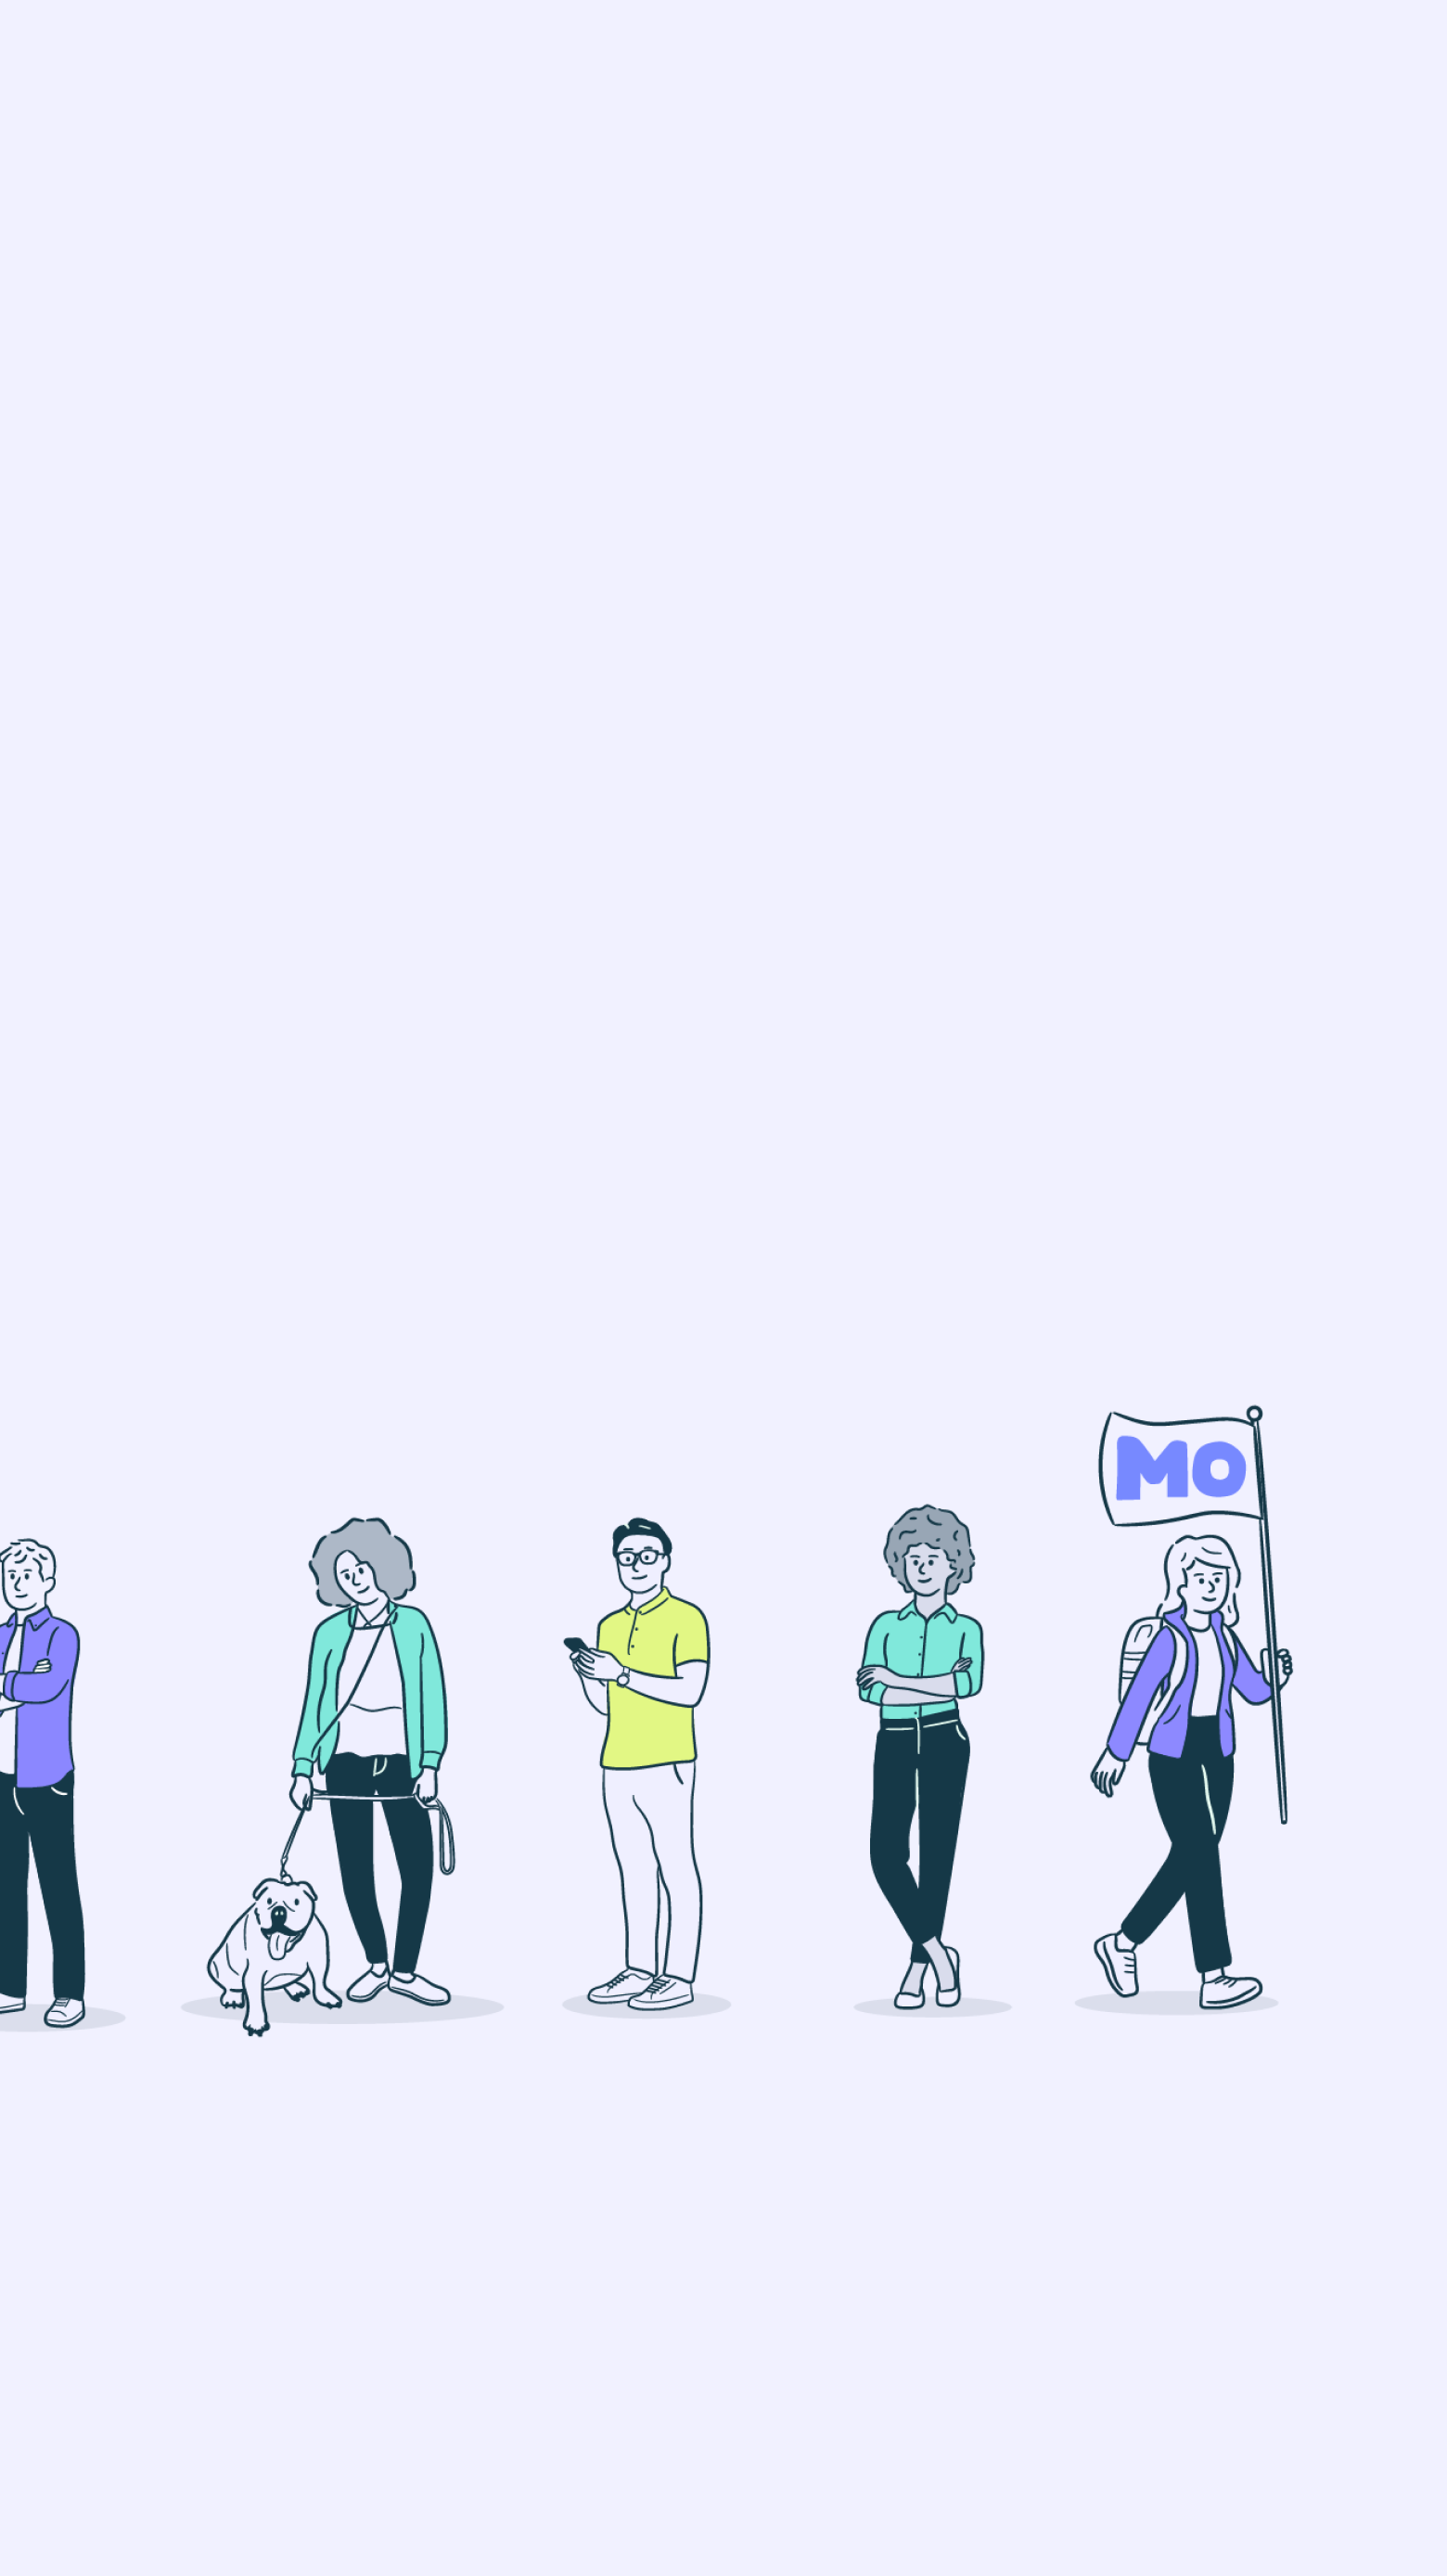 Illustration of a group of MO members